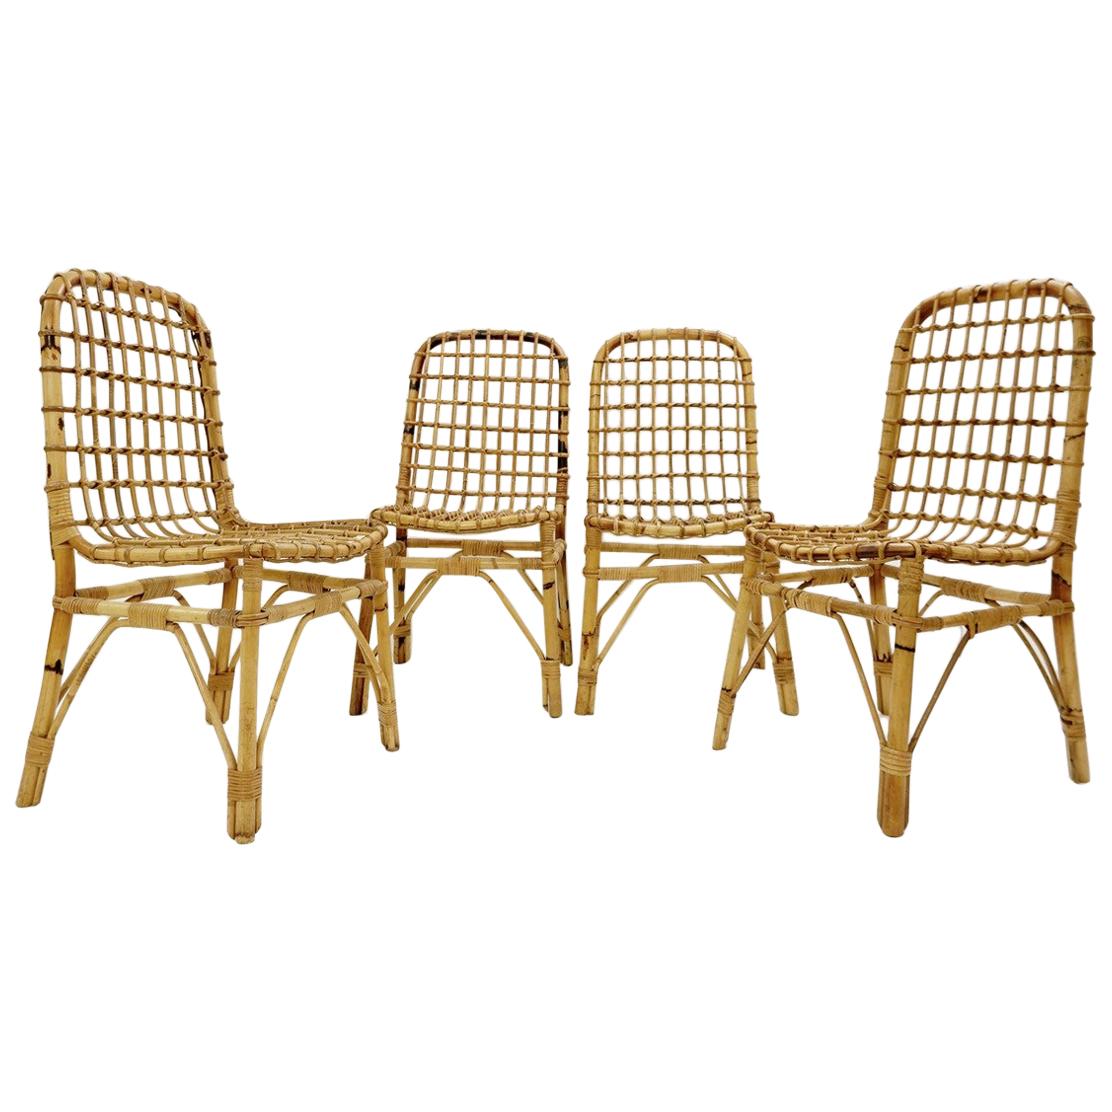 Set of 4 Mid-Century Modern Rattan Chairs, 1960s For Sale